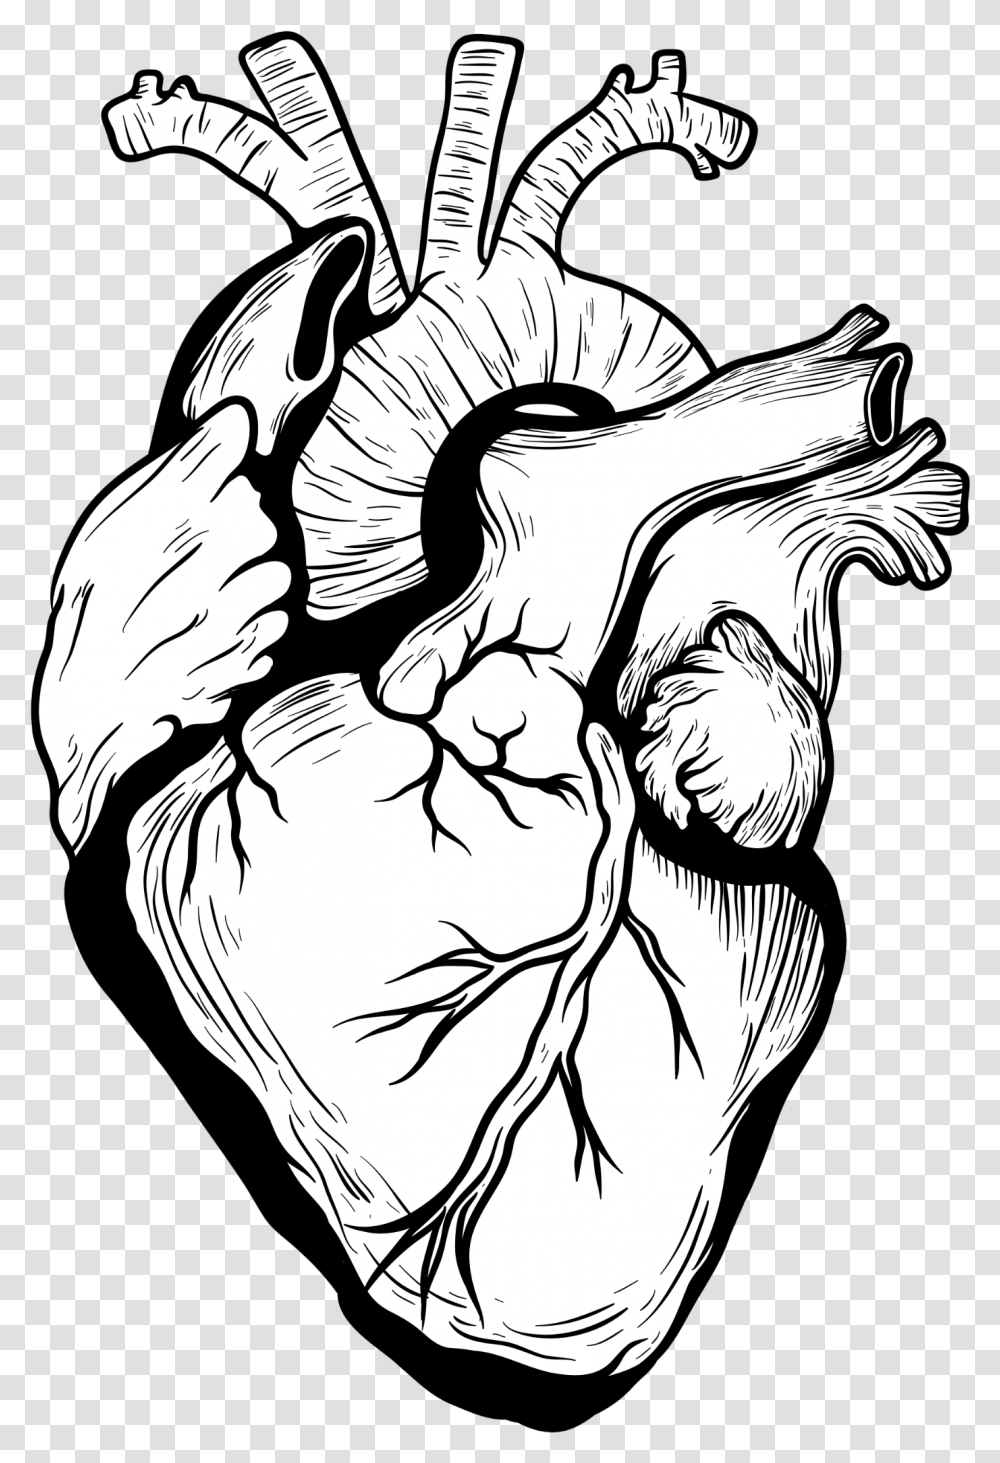 Designer Drawing Heart Clipart Free Black And White Heart Organ, Hand, Plant, Sketch, Fist Transparent Png